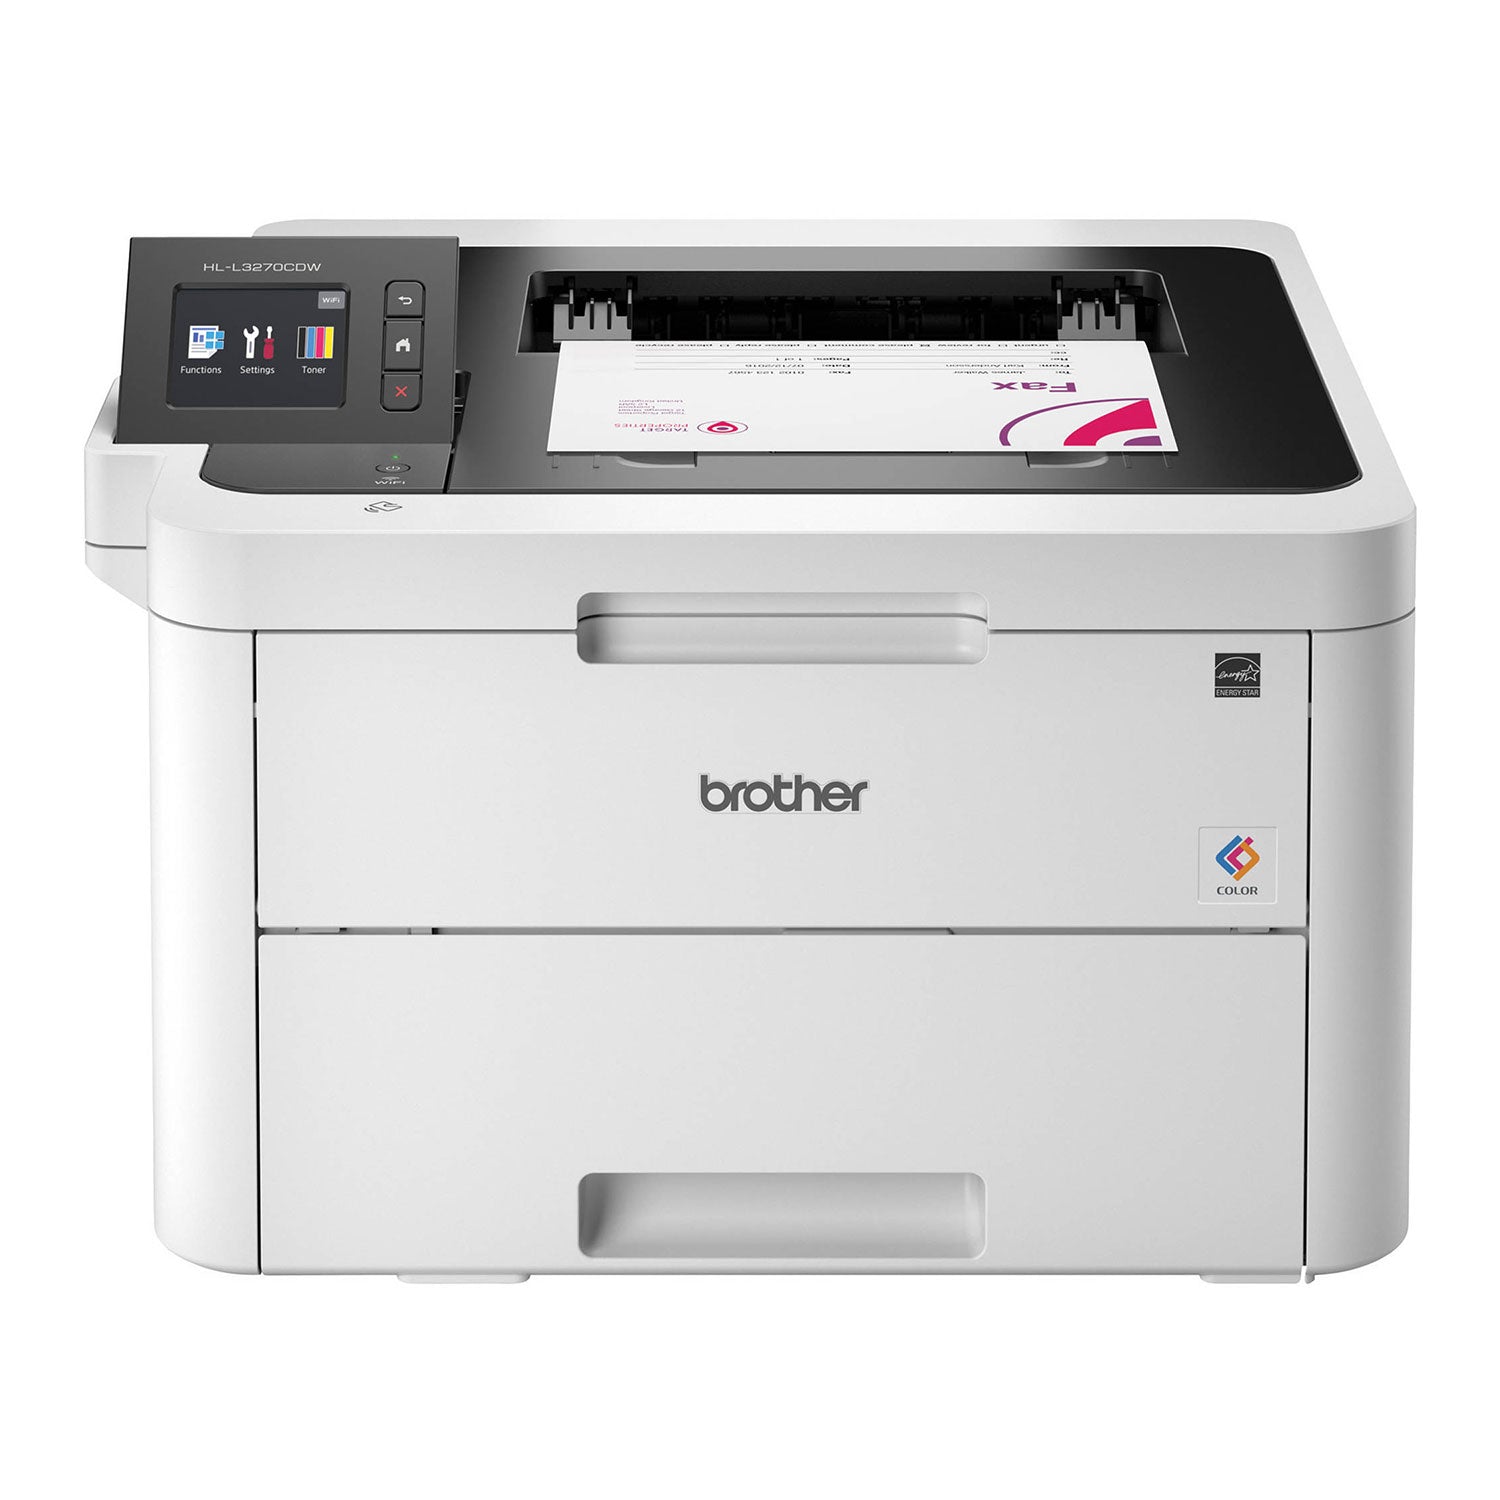 Brother HLL3270CDW Wireless Colour LED Laser Printer